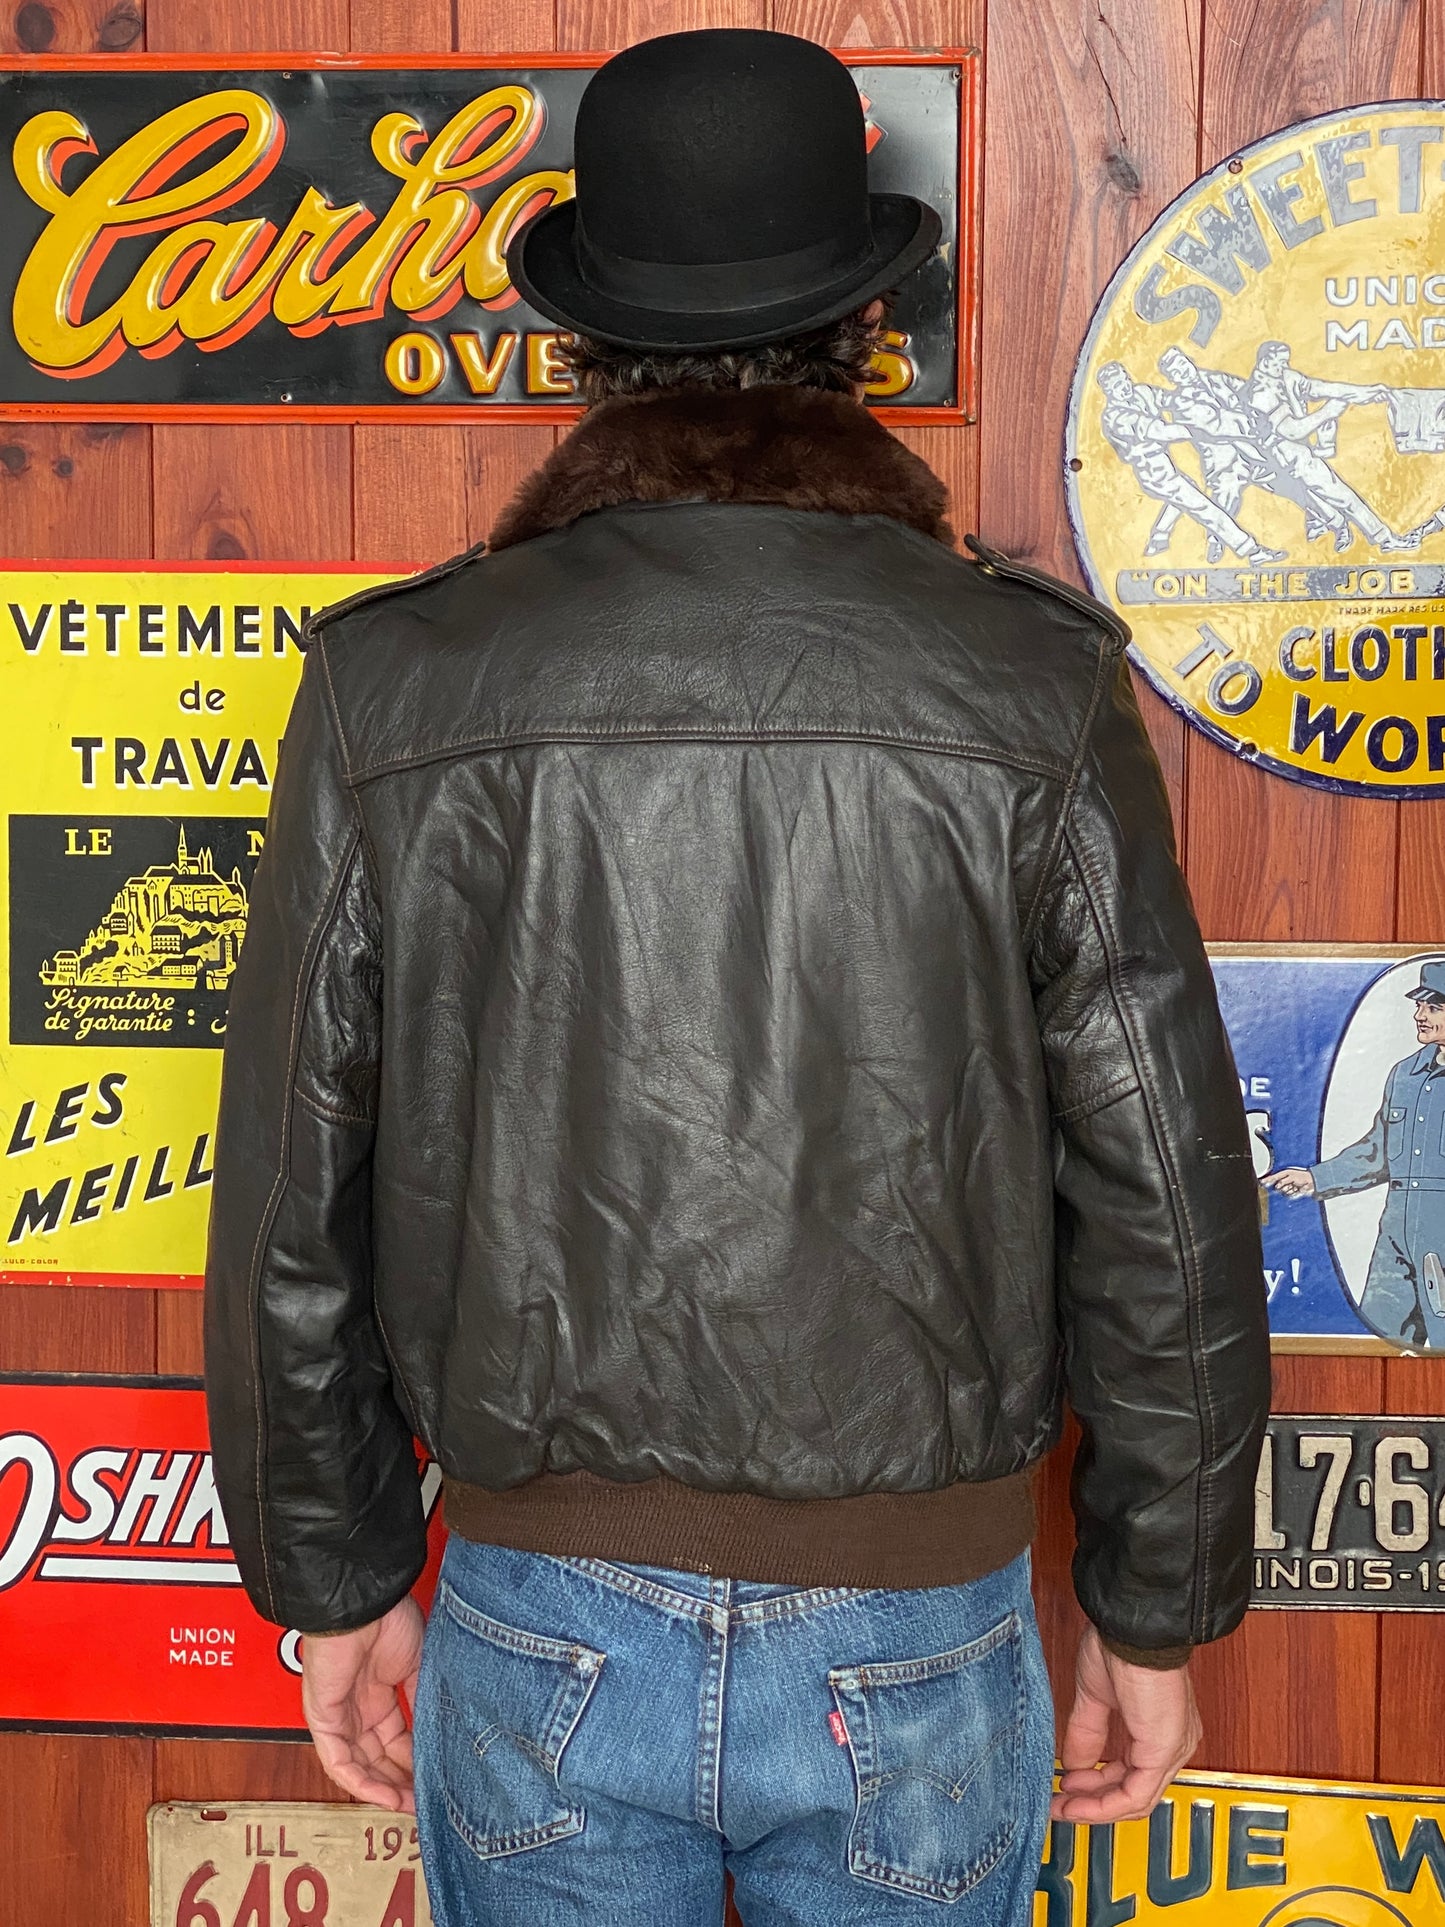 Vintage leather bomber flight jacket made in the USA, size 42 - Classic Aviator G-1 style with superior craftsmanship.